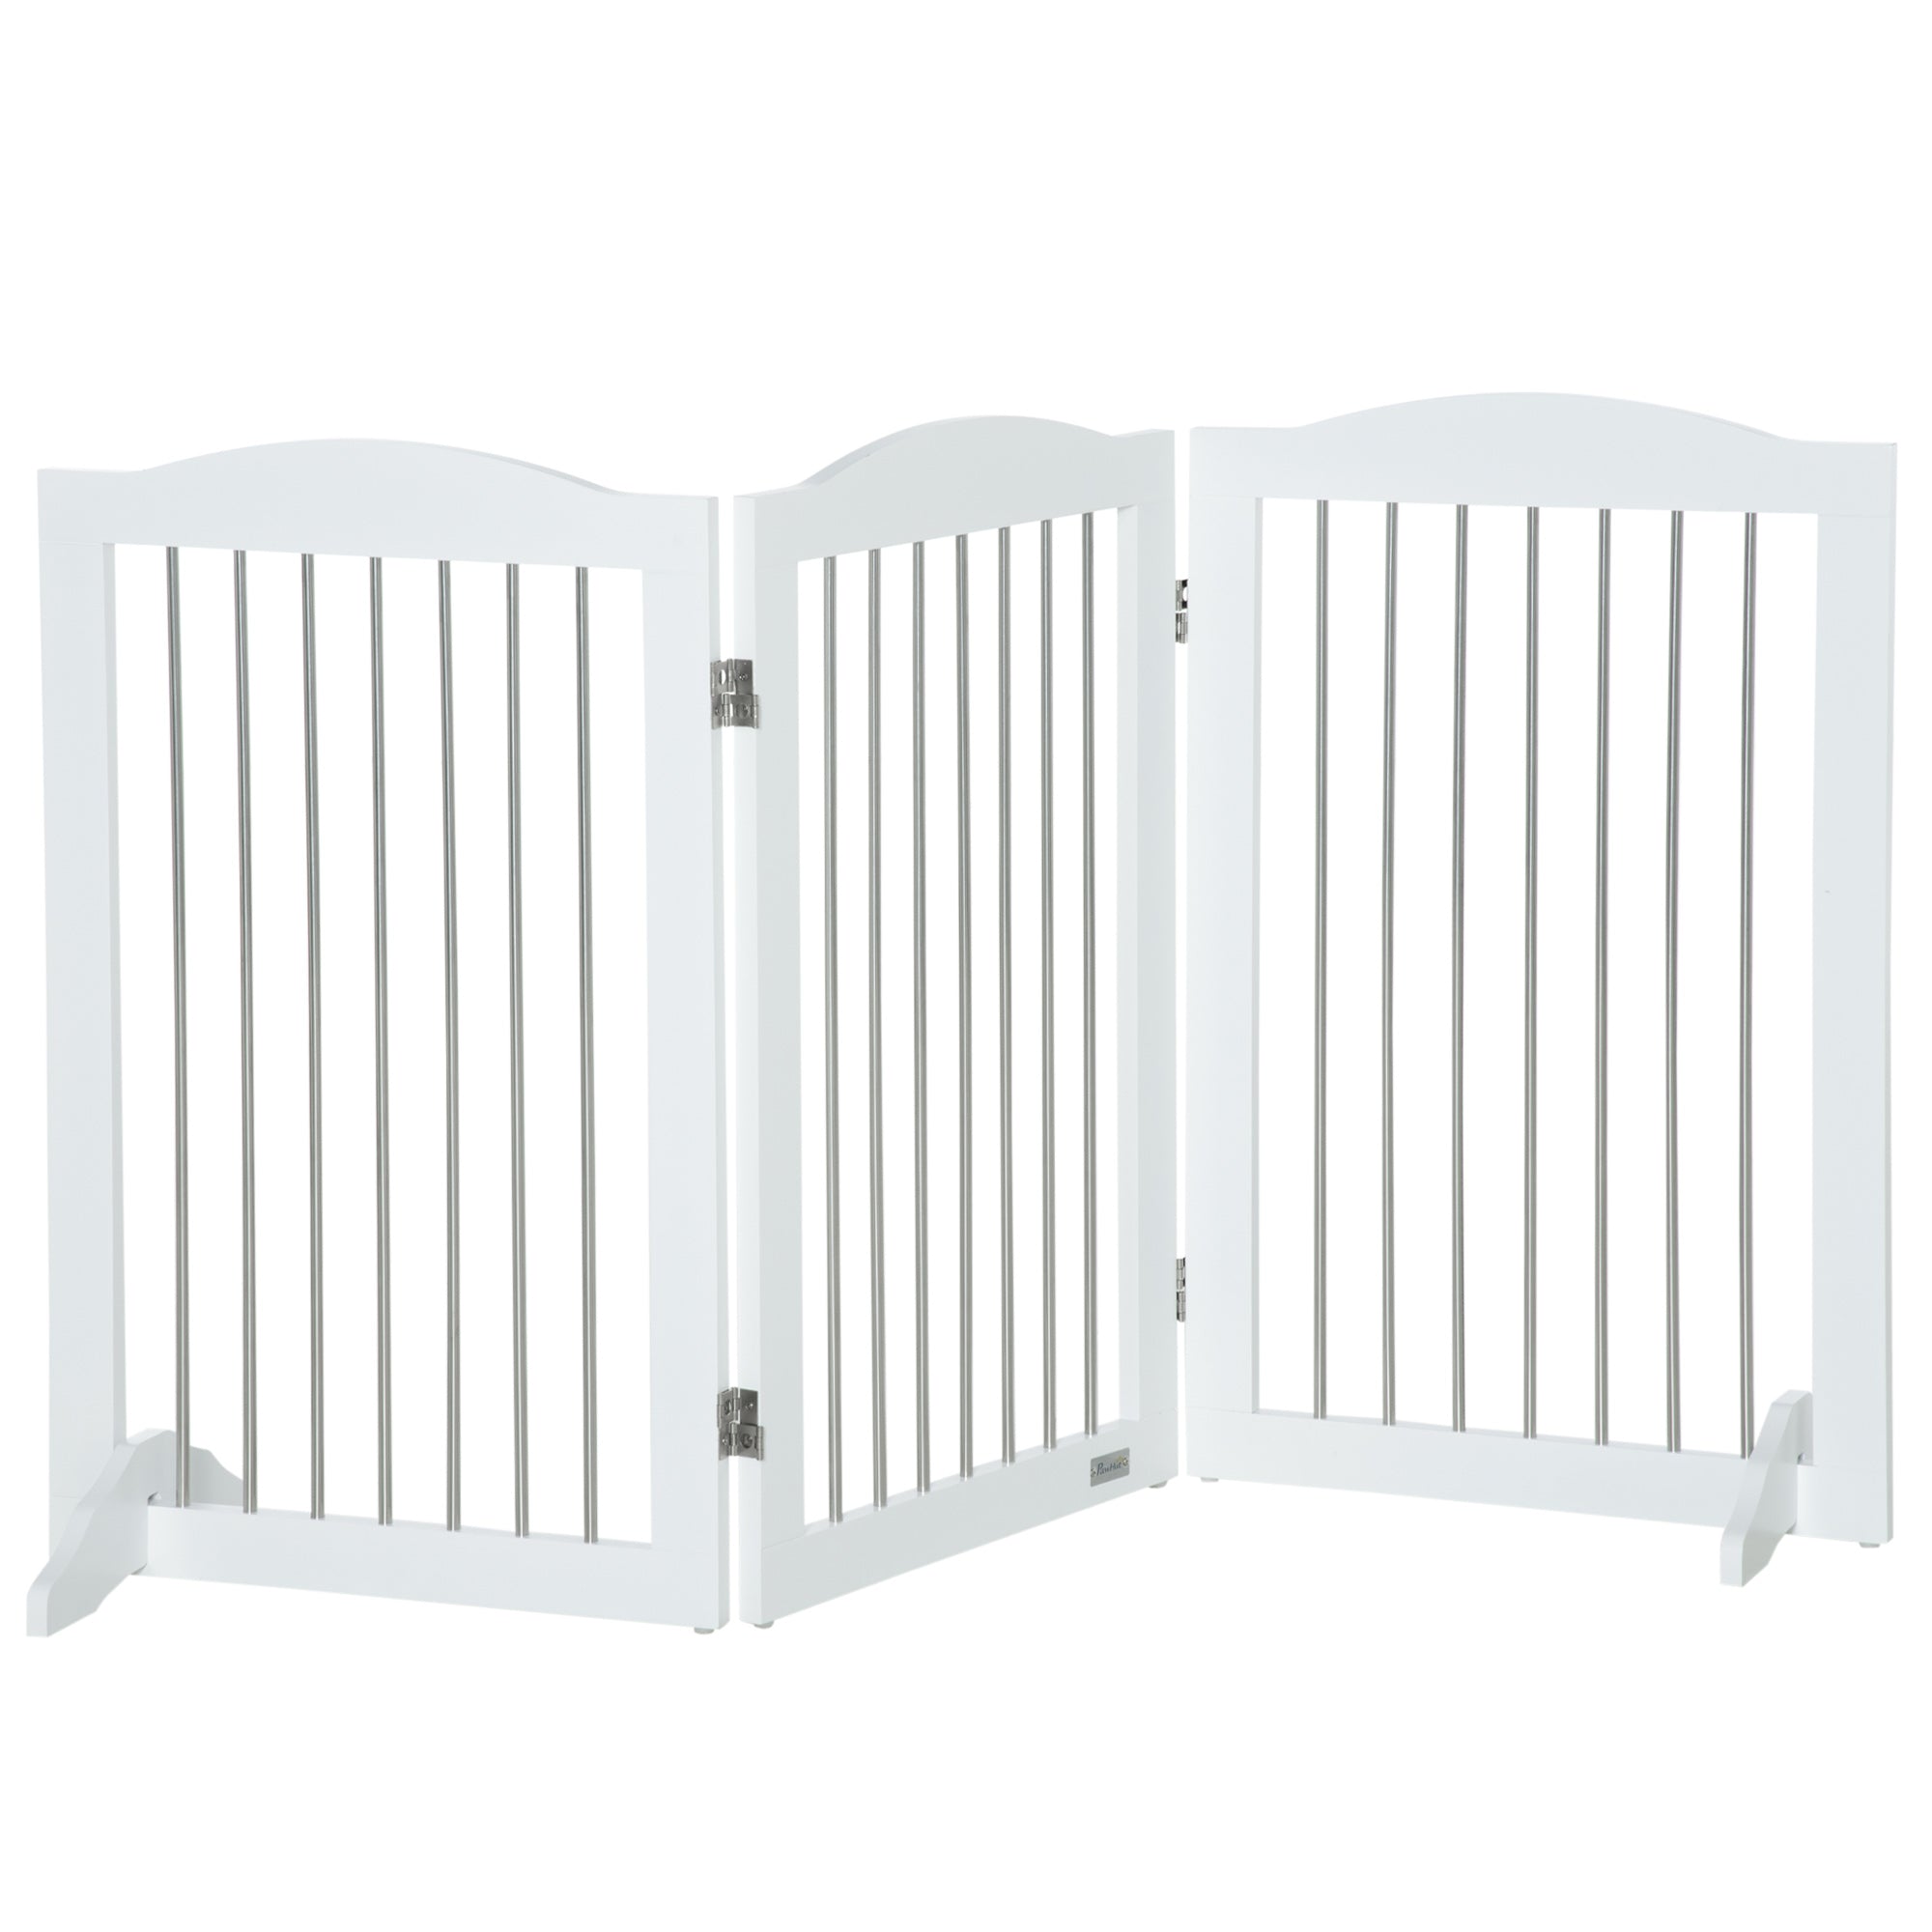 PawHut Foldable Dog Gate - Freestanding Pet Gate with Two Support Feet  | TJ Hughes